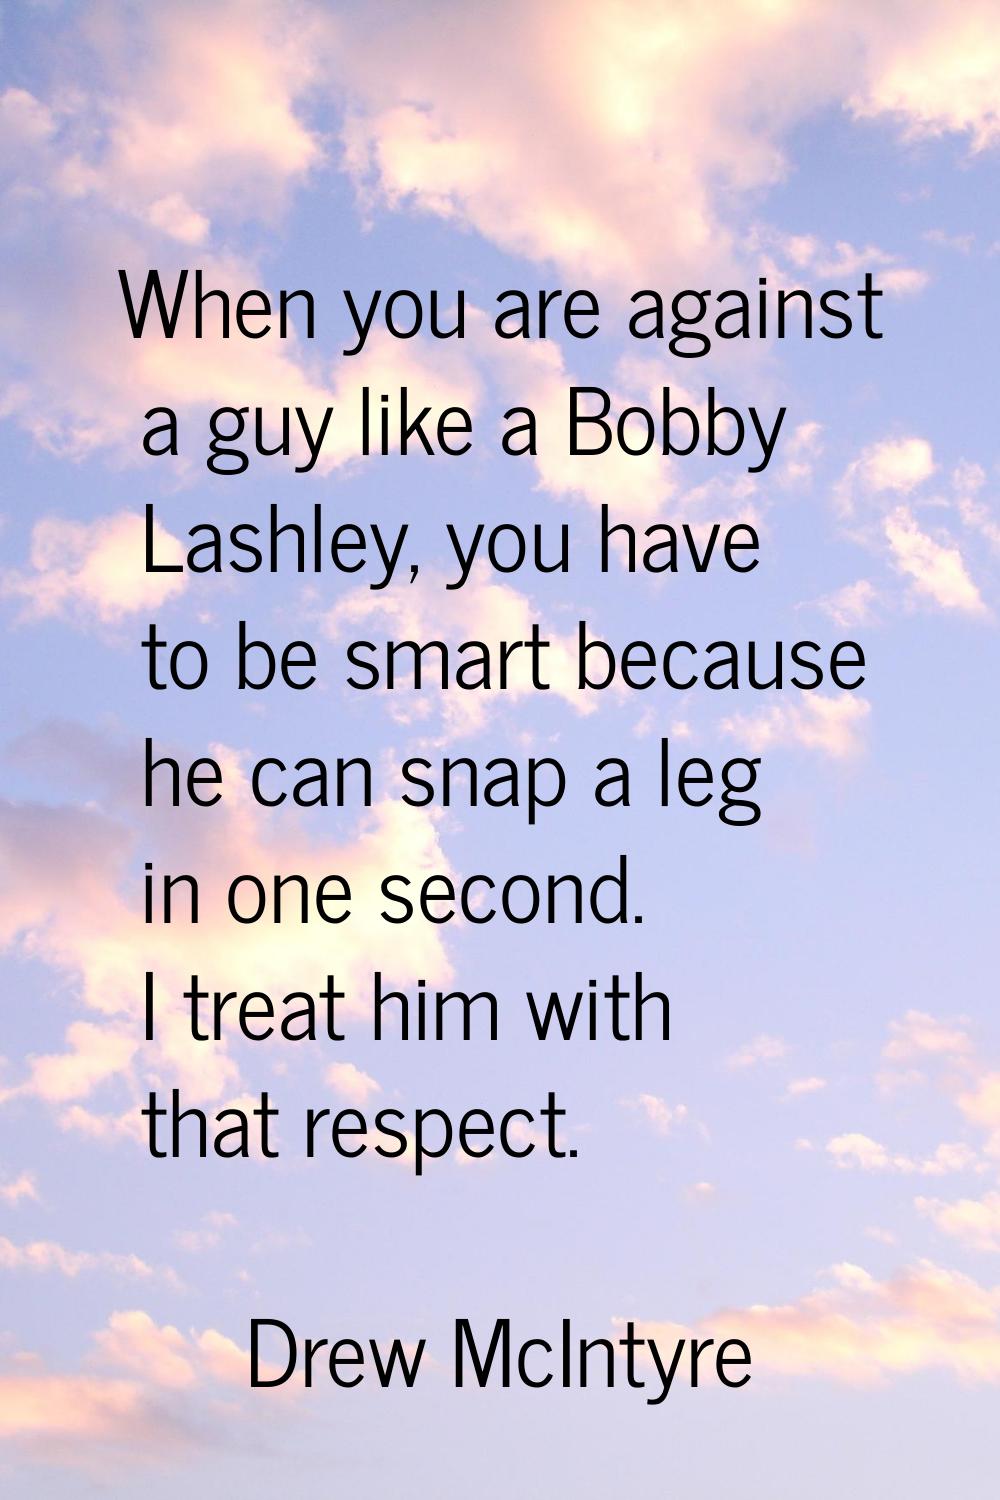 When you are against a guy like a Bobby Lashley, you have to be smart because he can snap a leg in 